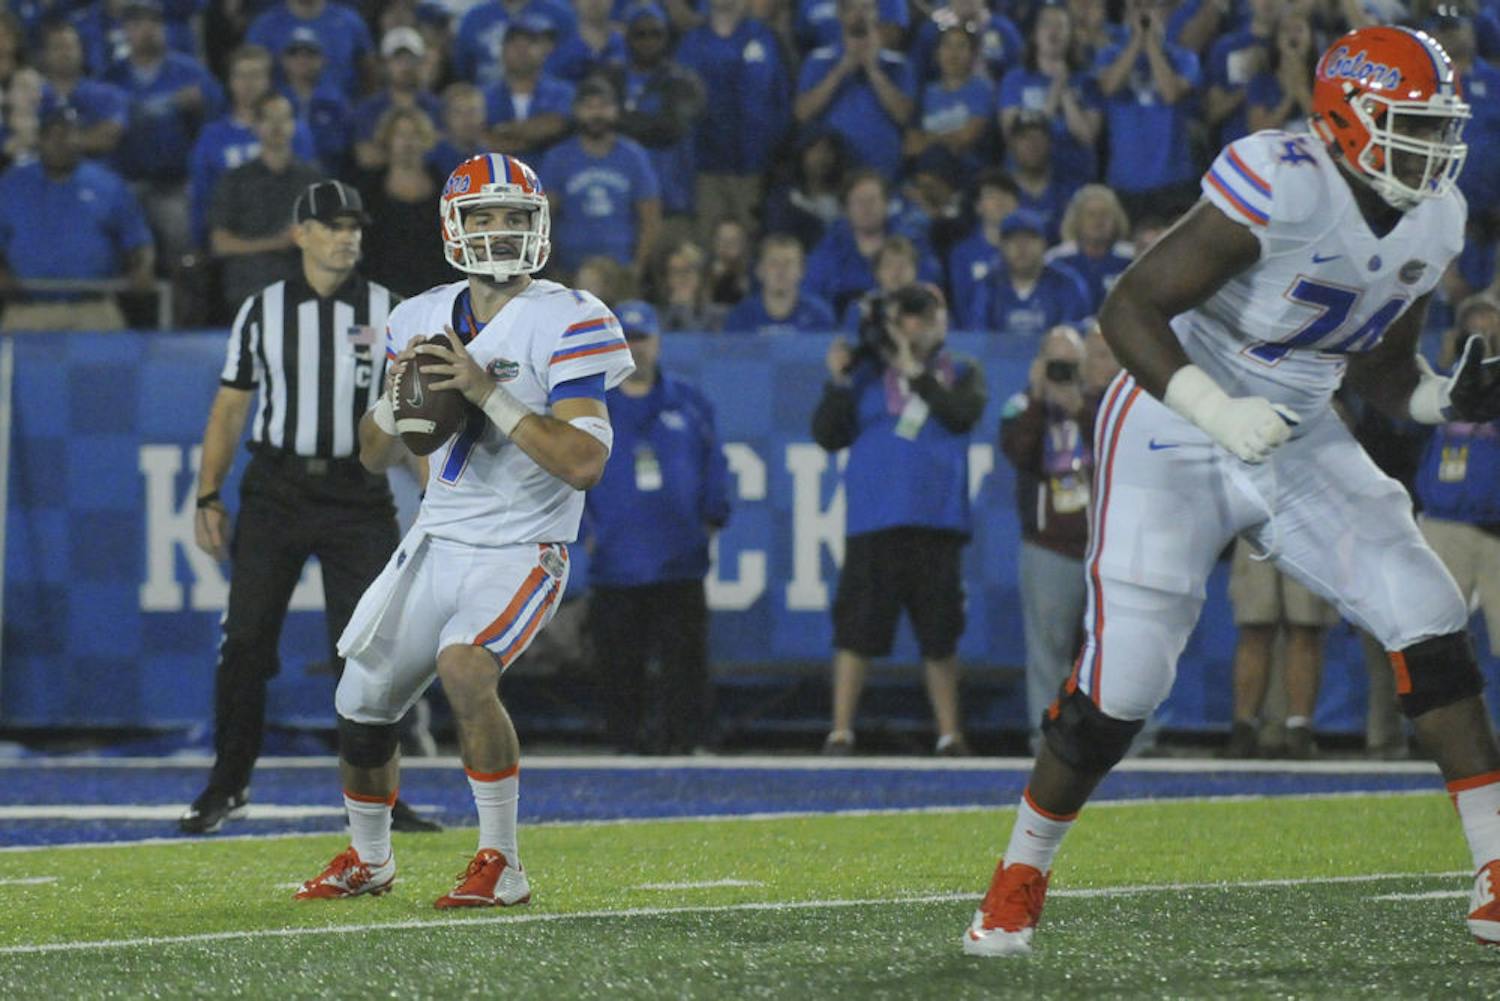 UF quarterback Will Grier drops back to pass during Florida's 14-9 win against Kentucky on Sept. 19, 2015, at Commonwealth Stadium in Lexington, Kentucky